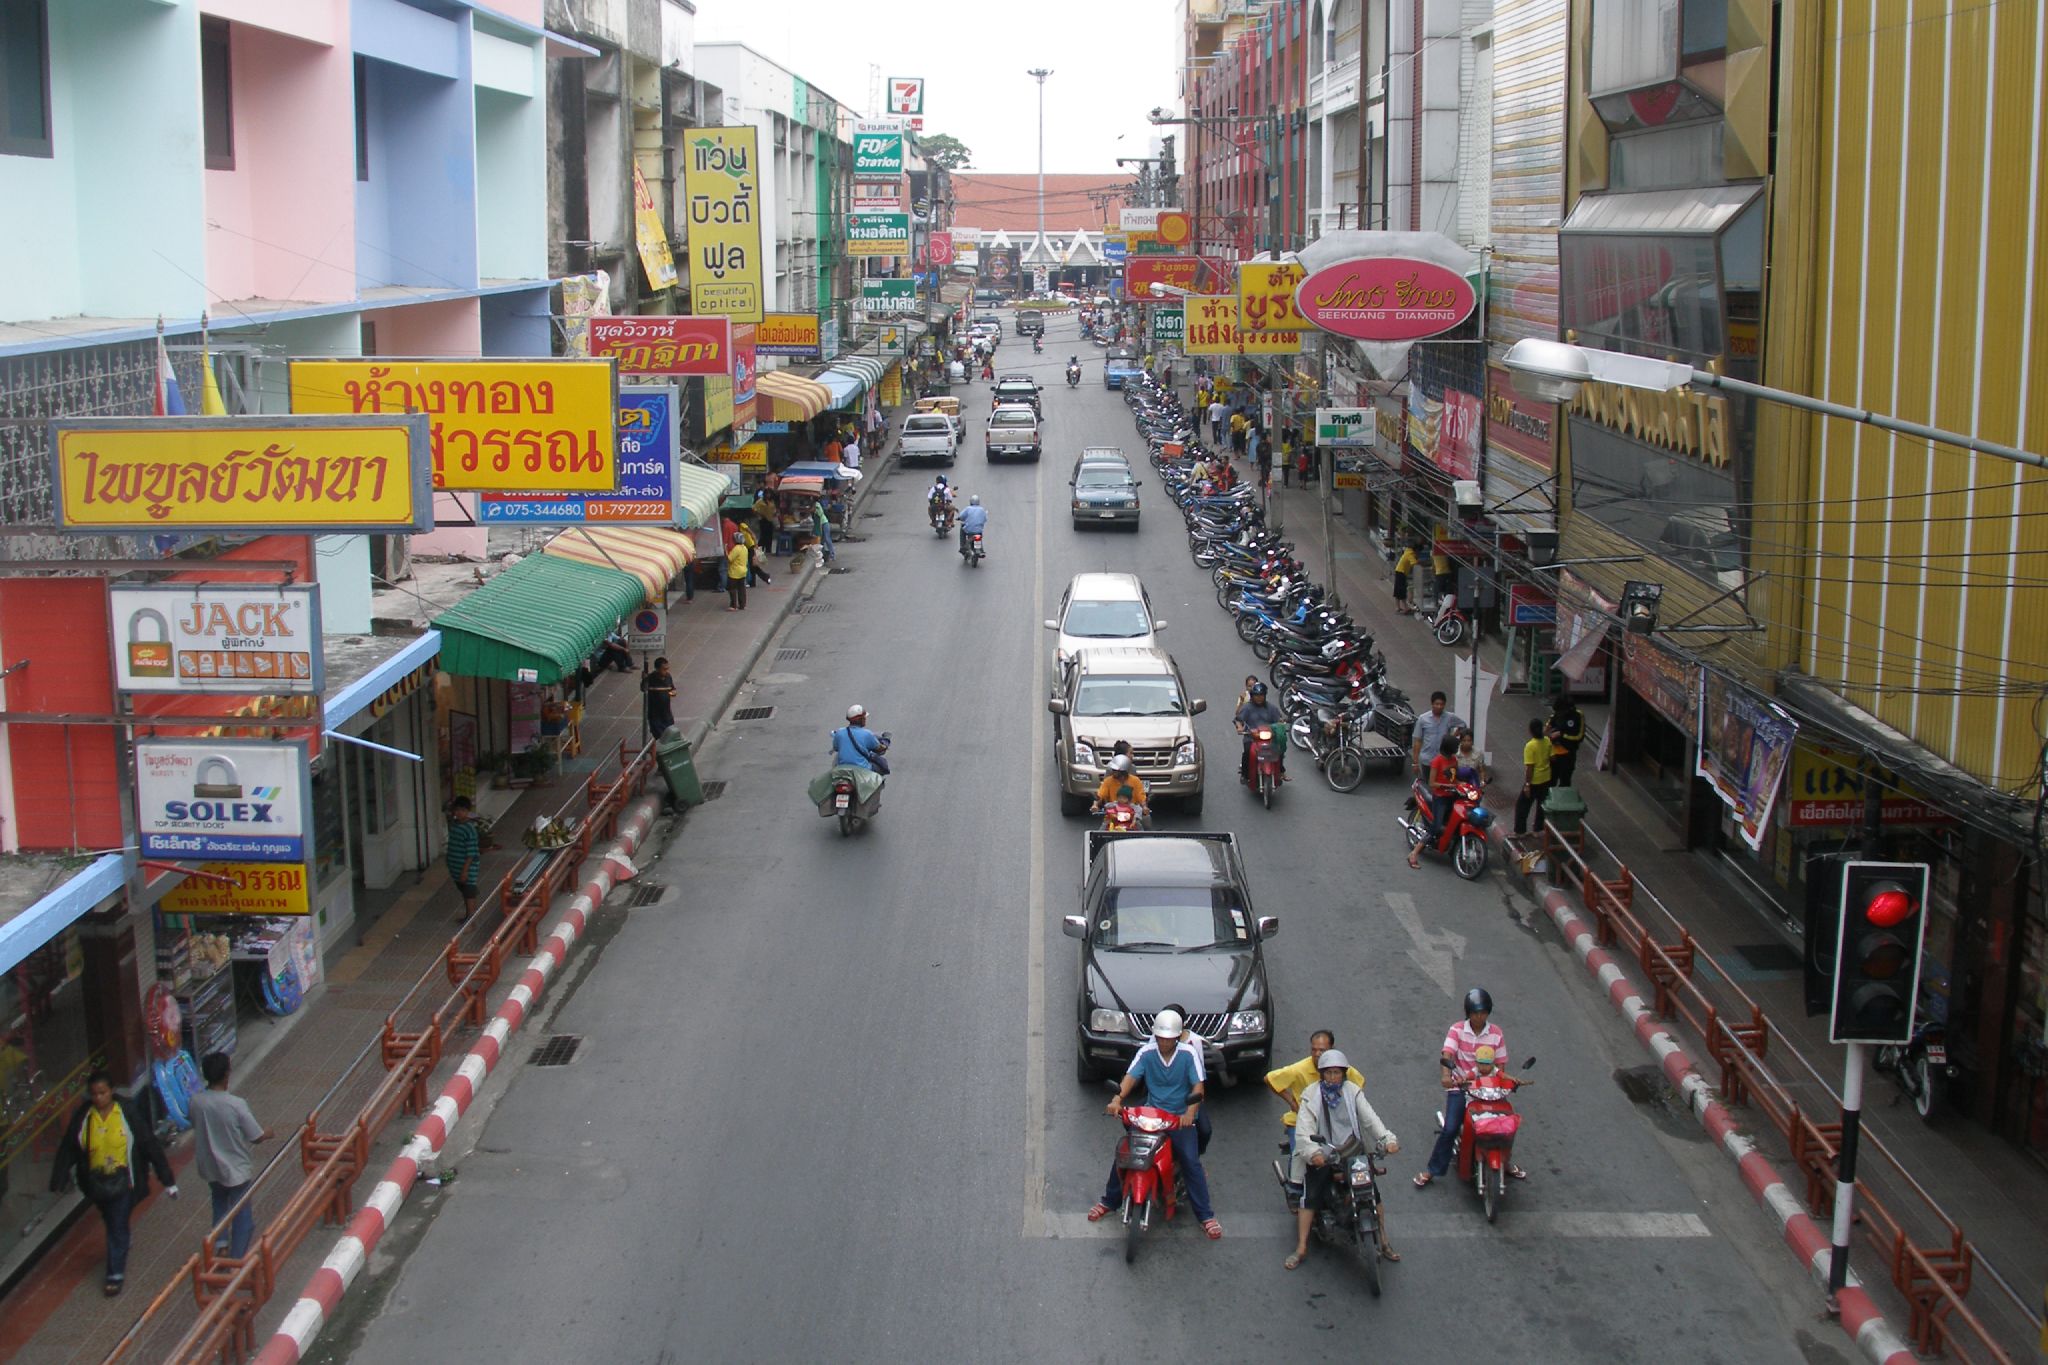 an aerial view of a city street with a small crowd on a motor cycle